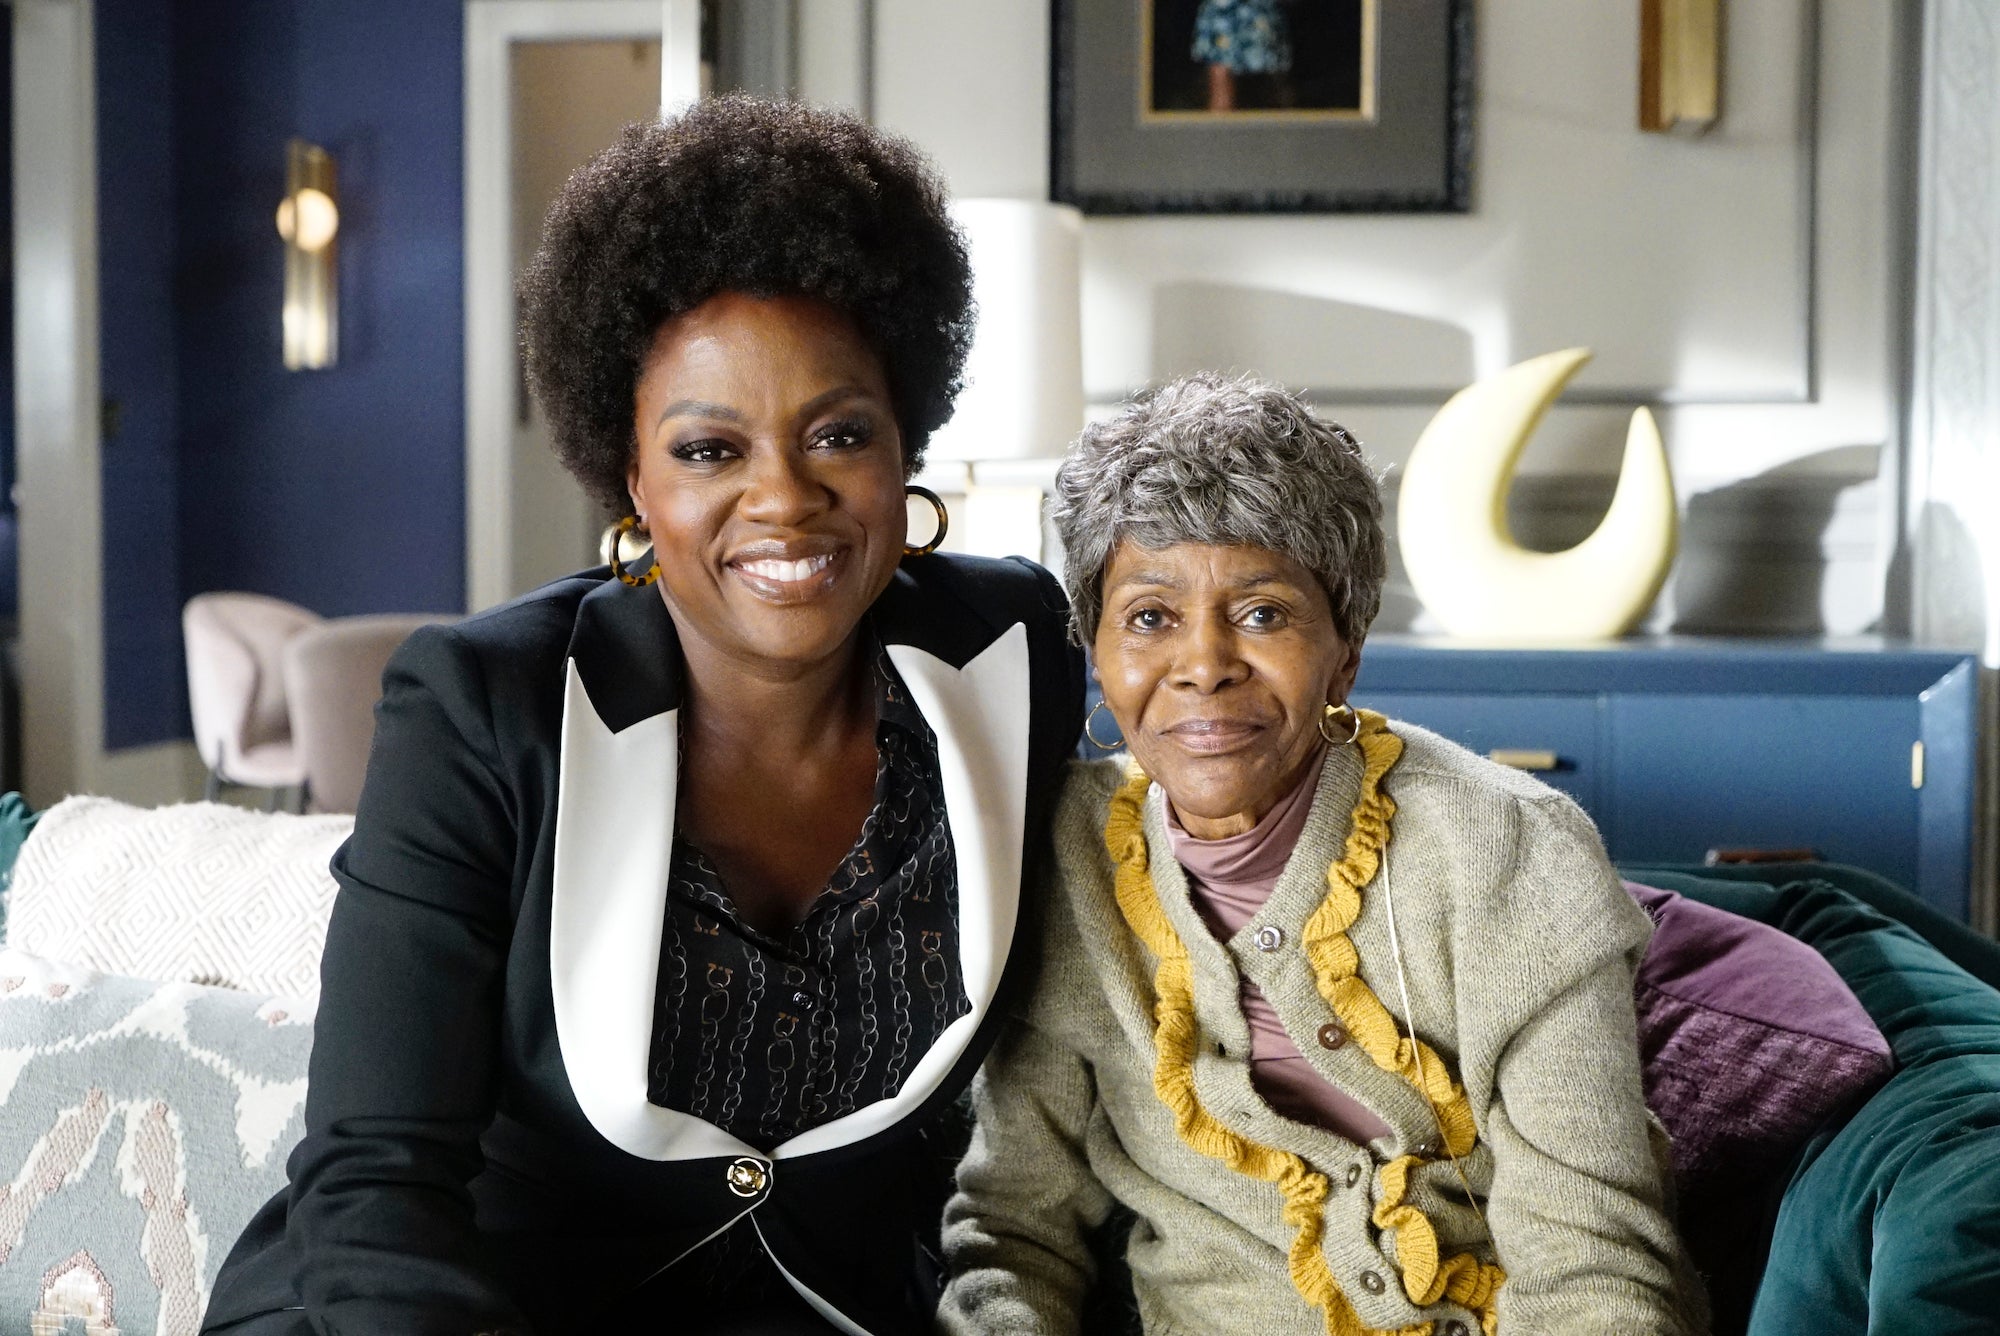 Your First Look At Cicely Tyson's Final Appearance On 'How To Get Away With Murder'